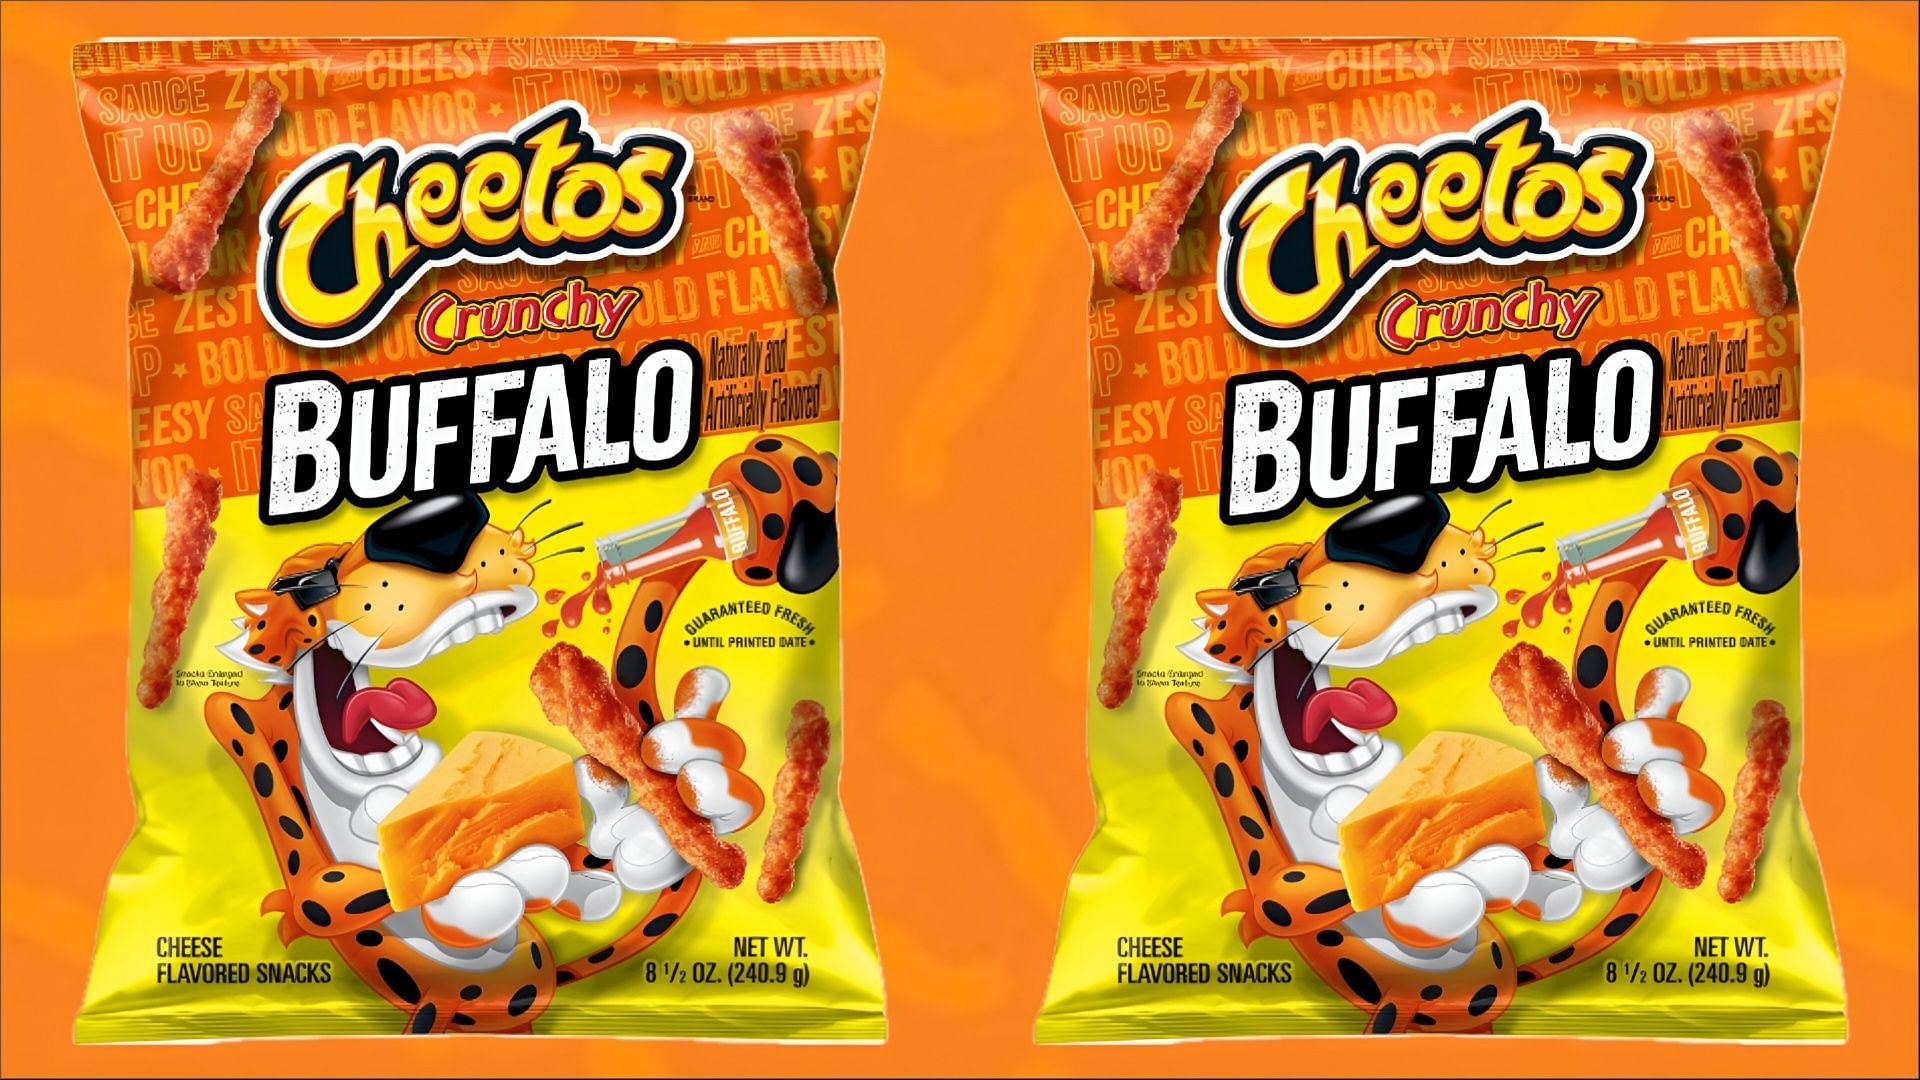 The new Crunchy Buffalo flavor is priced at over $4.49 (Image via Cheetos)